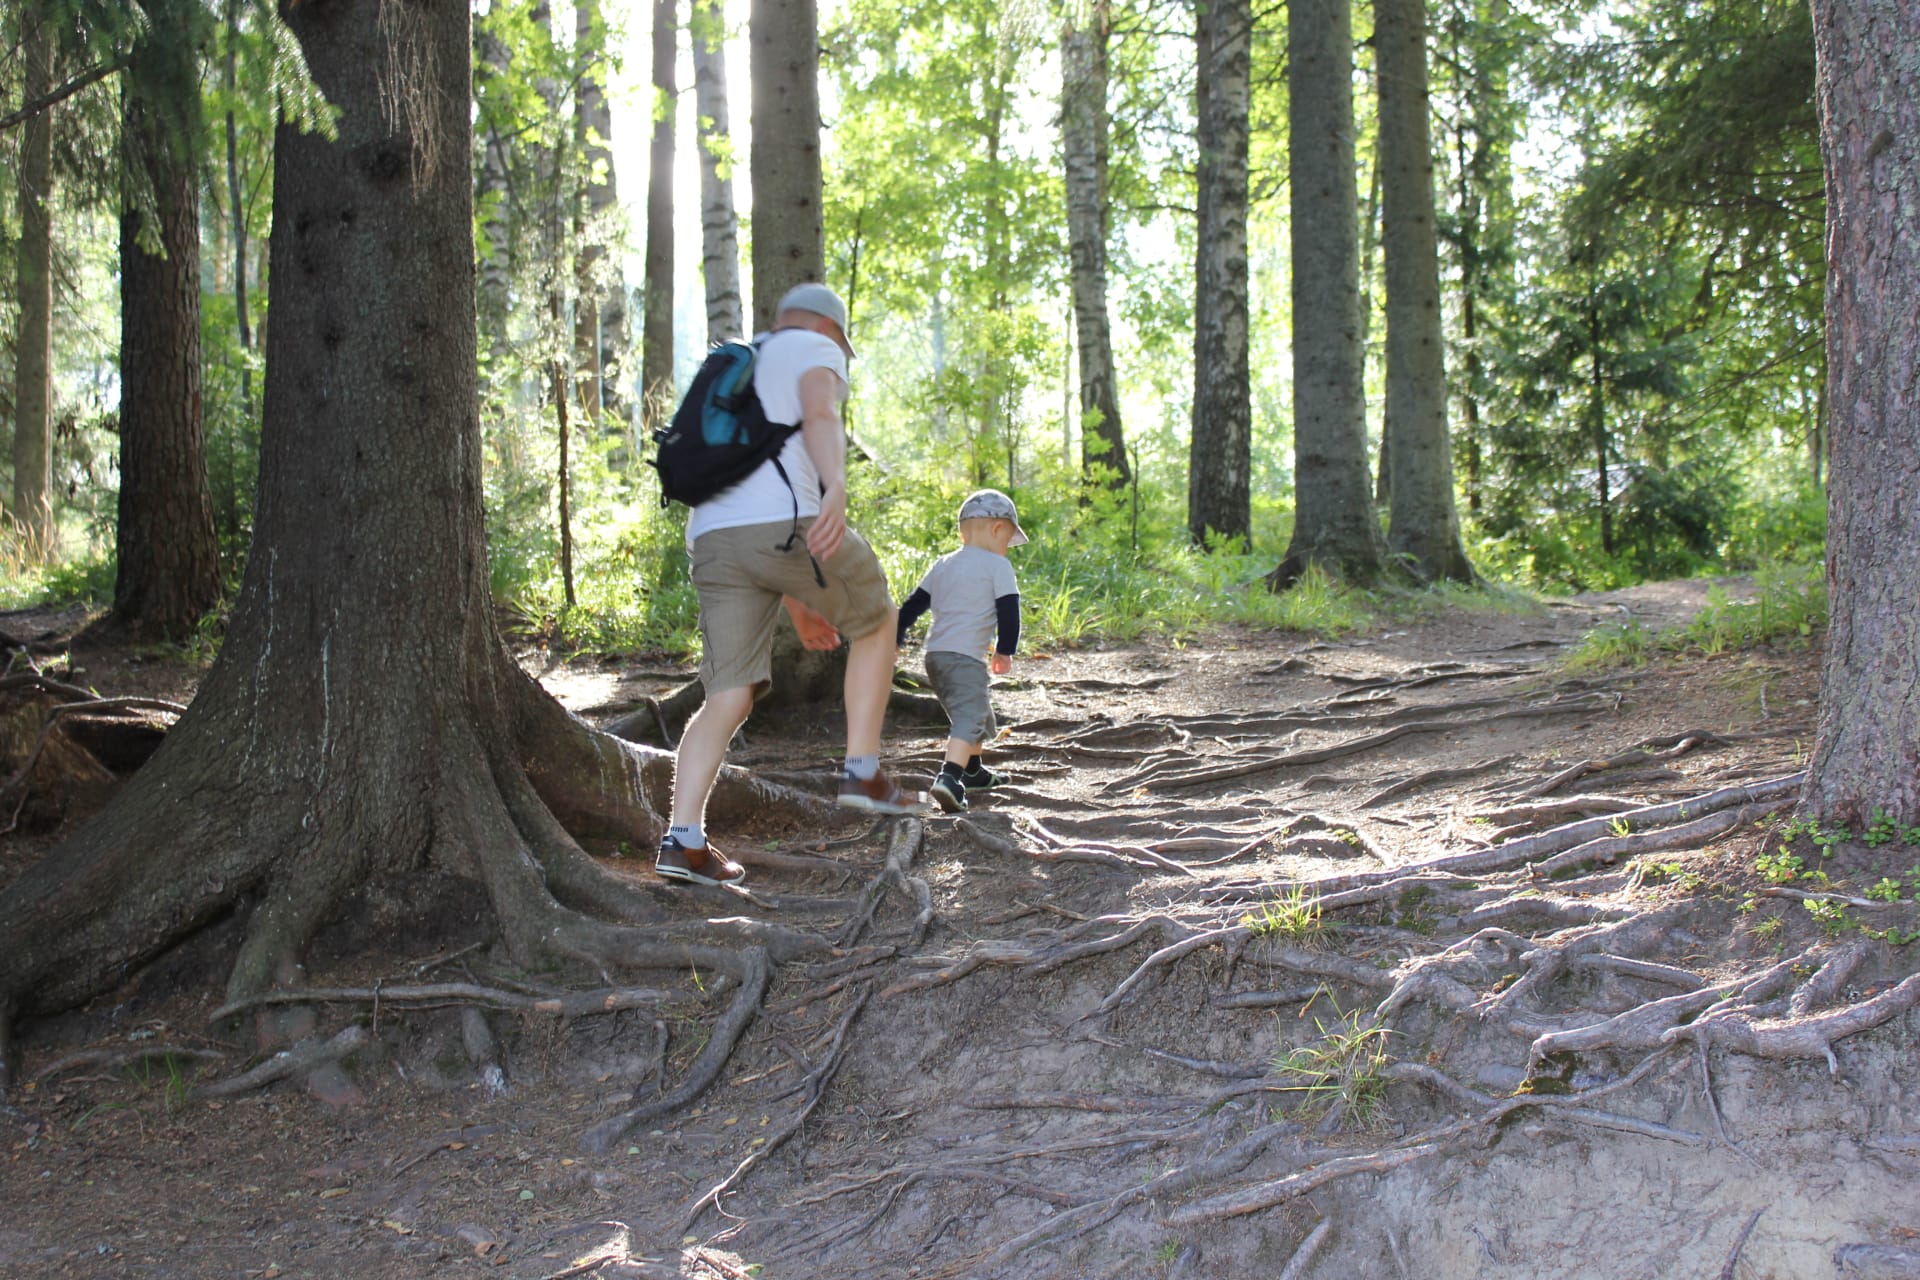 A child and adult are walking on a forest path.